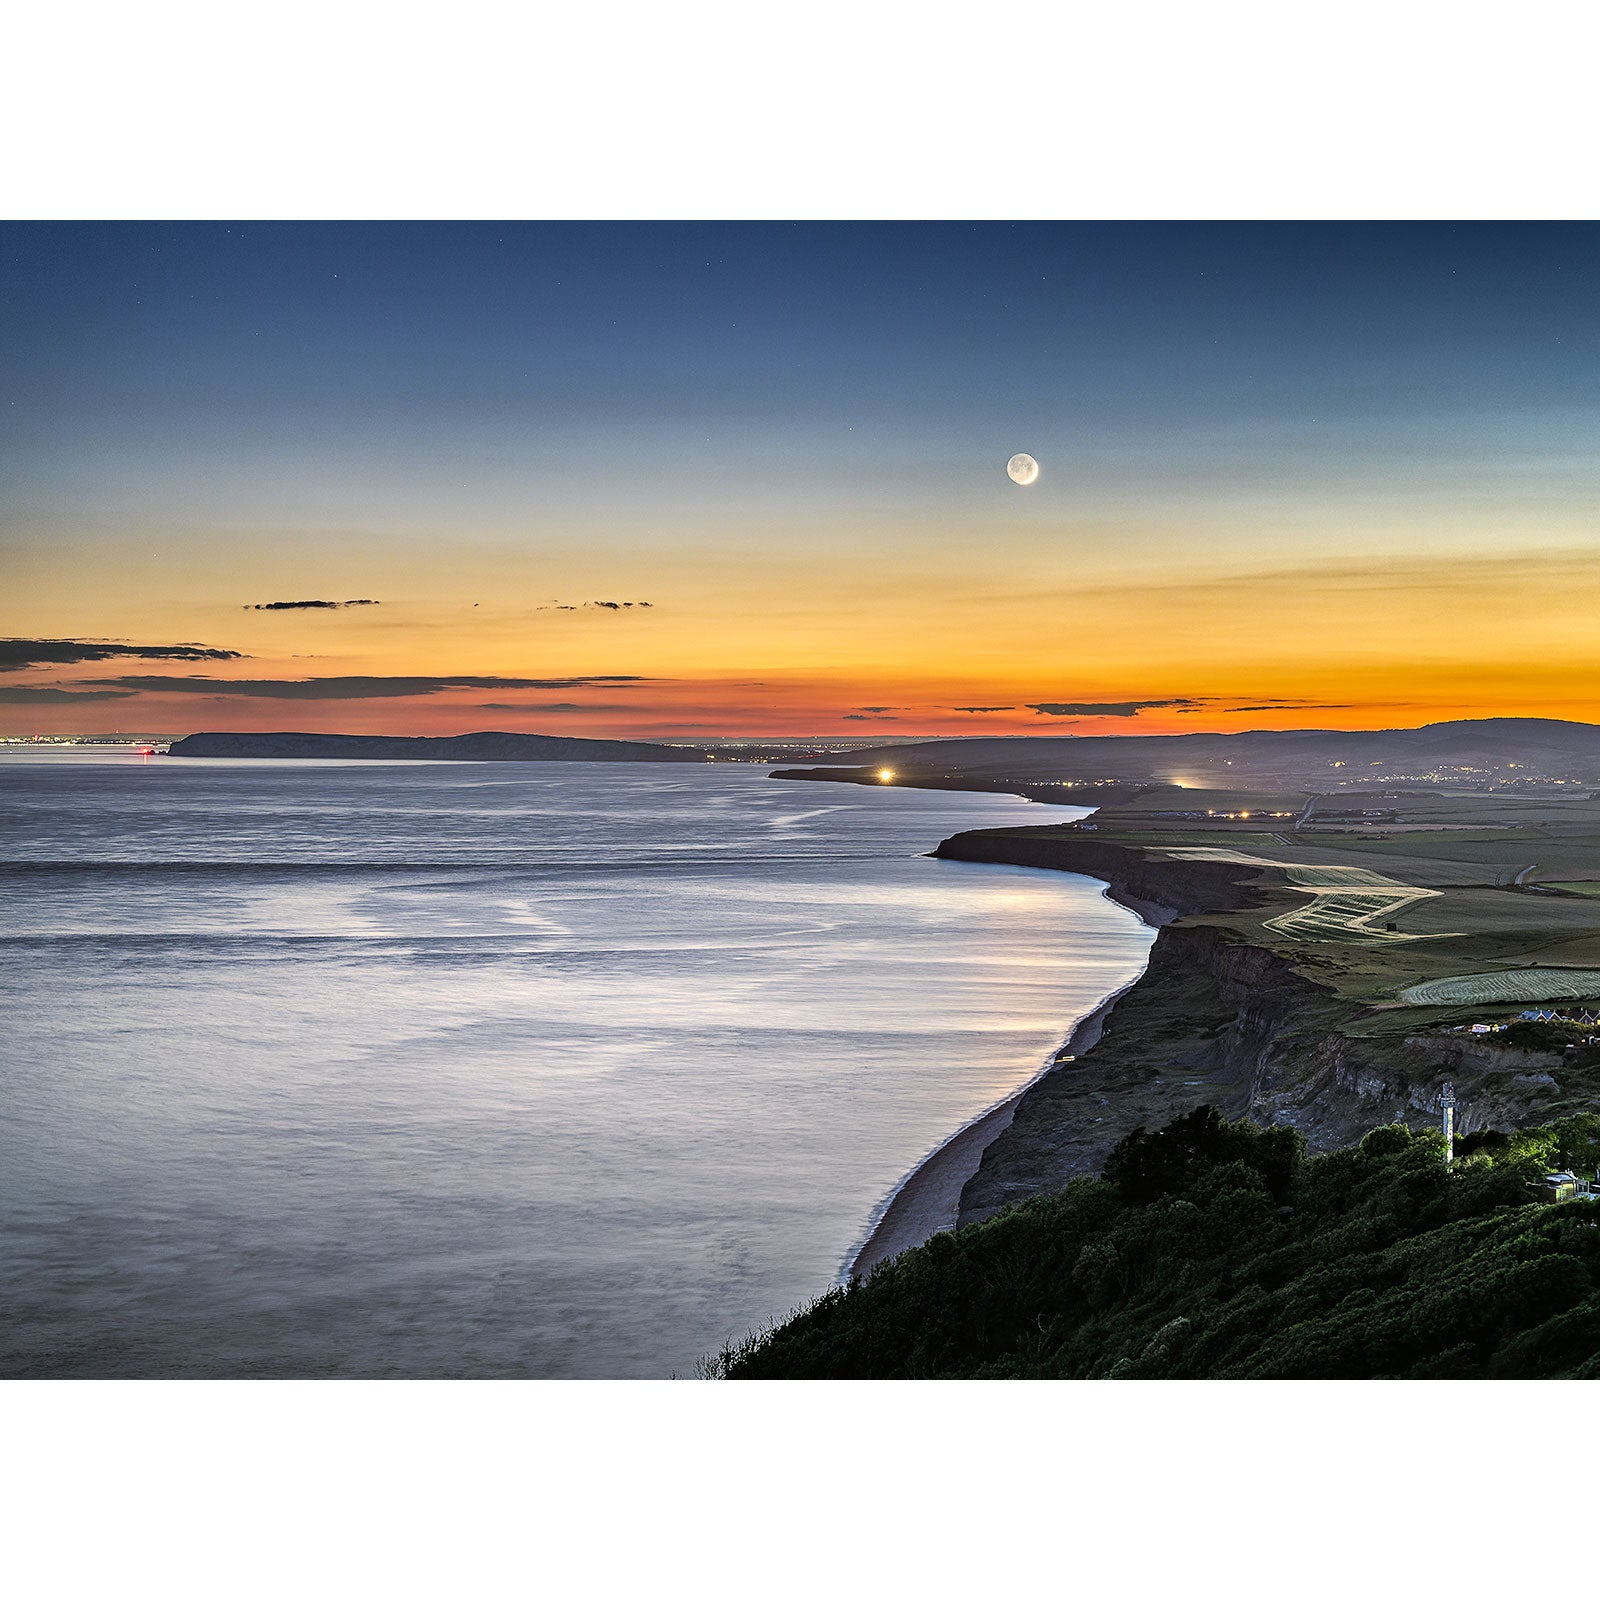 A coastal twilight scene with the Crescent Moon over West Wight visible in the sky over a meandering river estuary on the Isle of Wight by Available Light Photography.